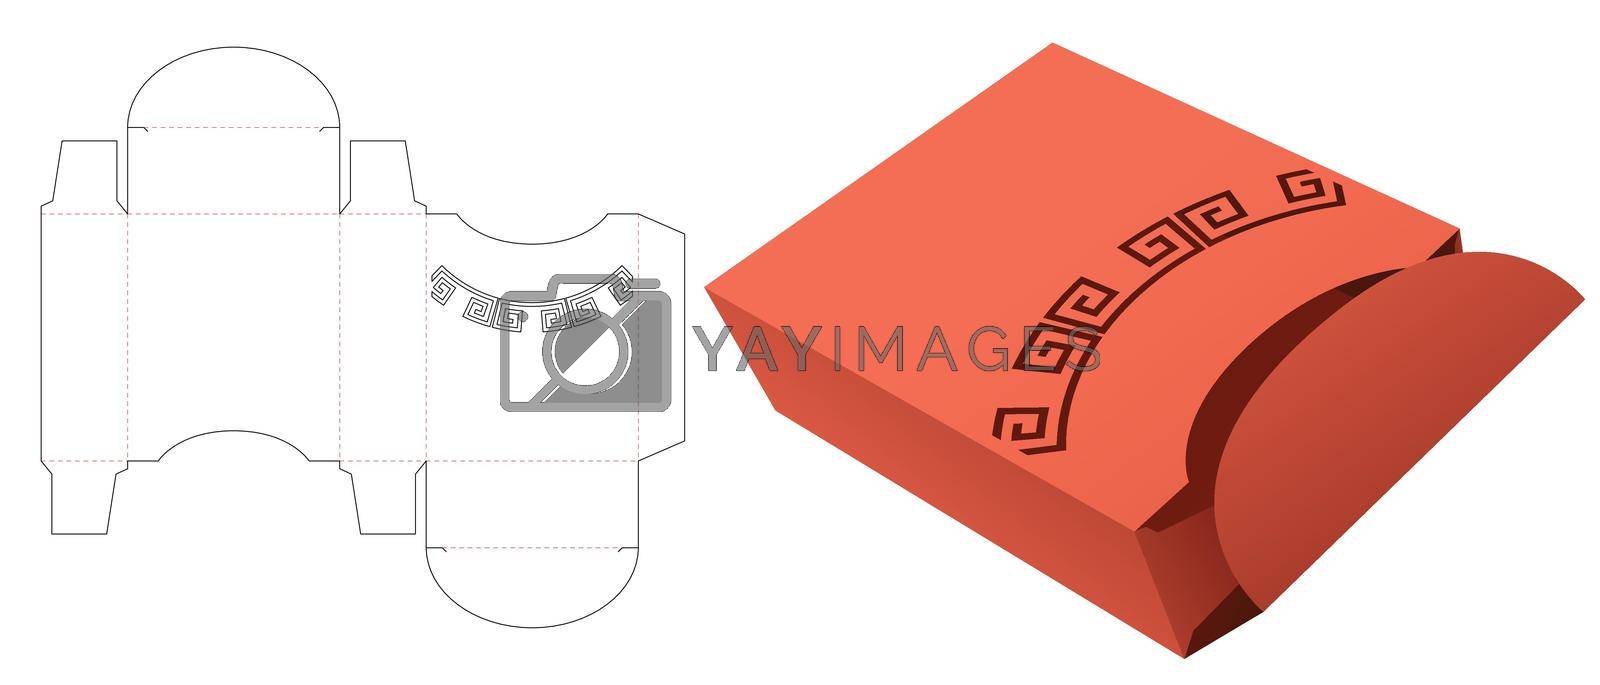 Royalty free image of Cardboard box with stenciled Chinese pattern die cut template by valueinvestor